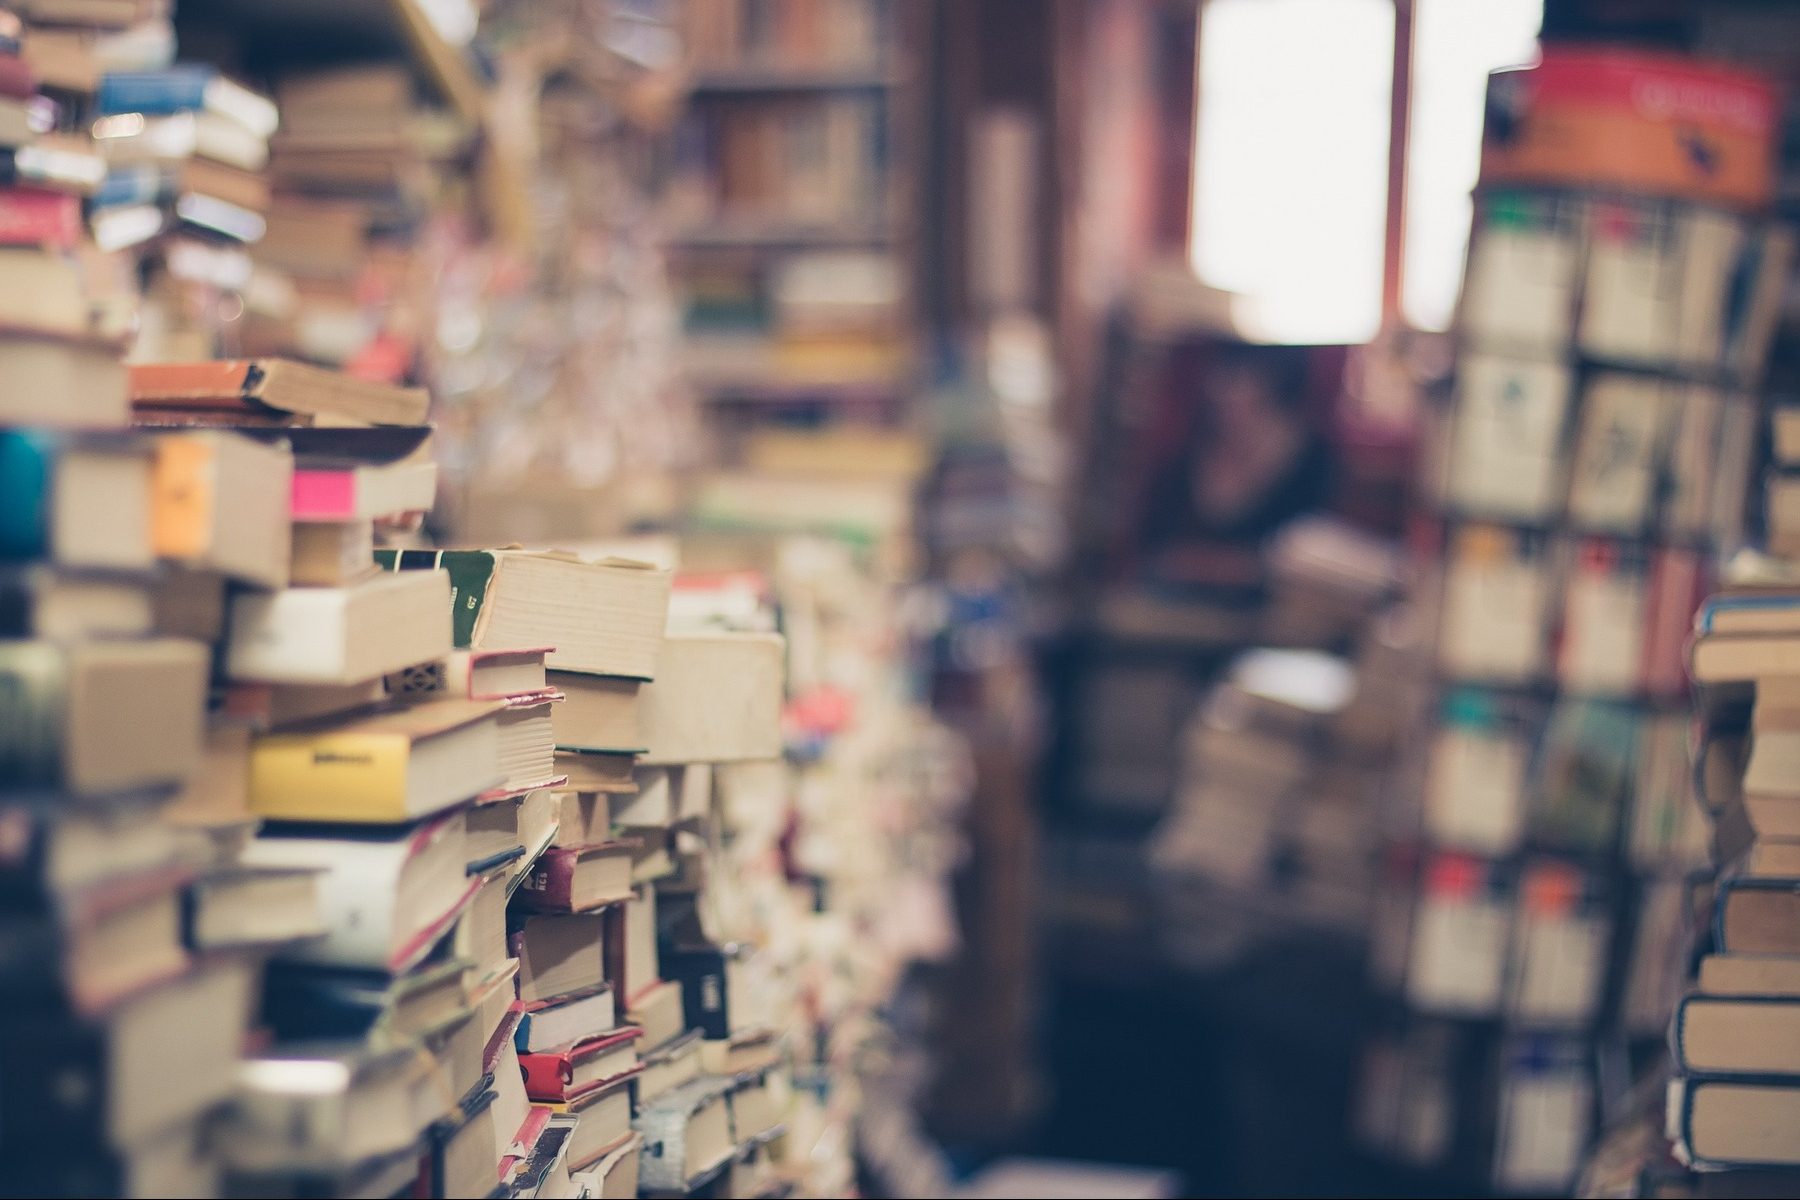 In an article about great books by Nigerian authors, the inside of a bookshop with piles of books all around.